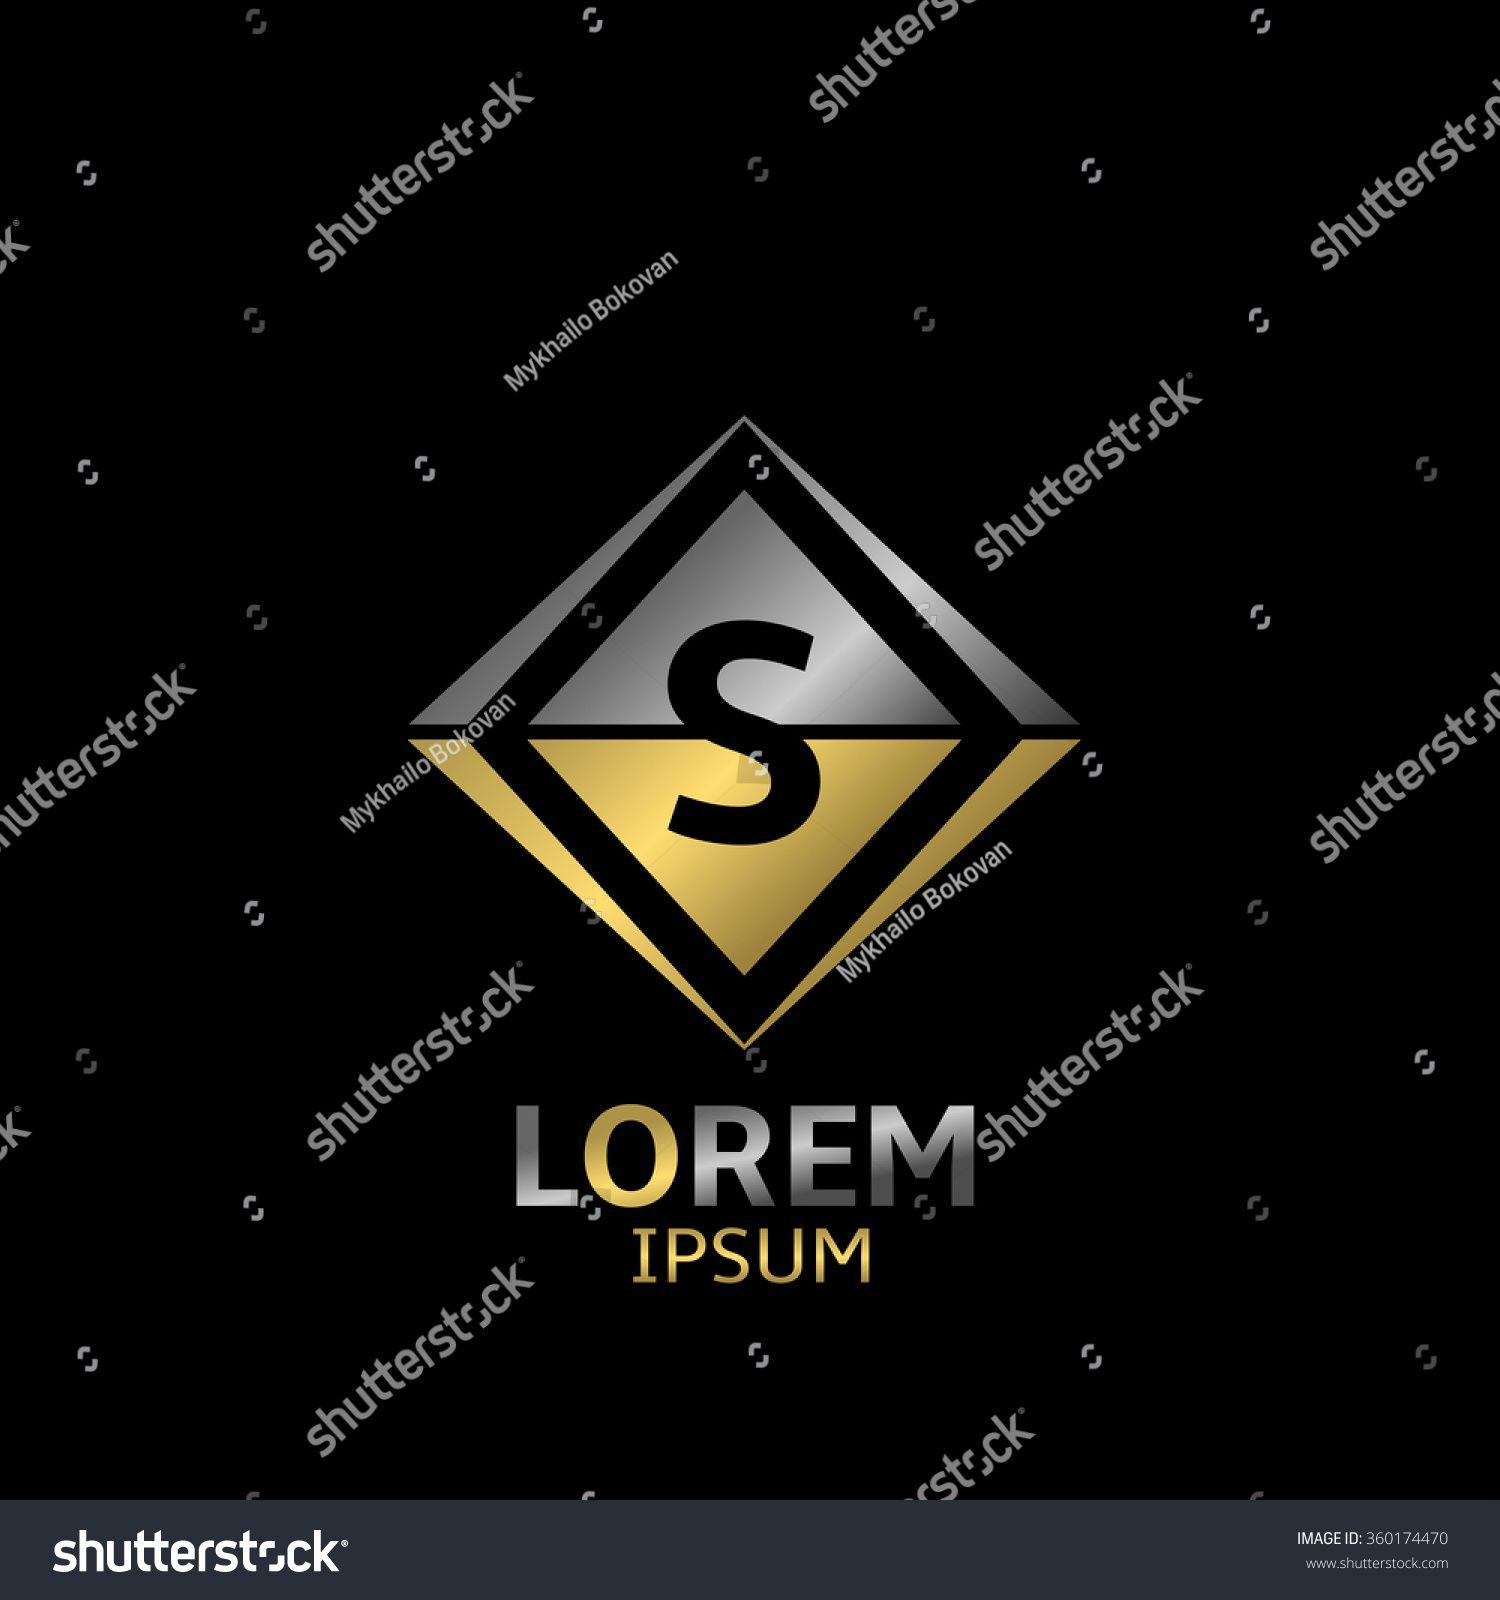 Golden S Logo - Letter S logo. Brand symbol with golden and silver elements, Vector ...